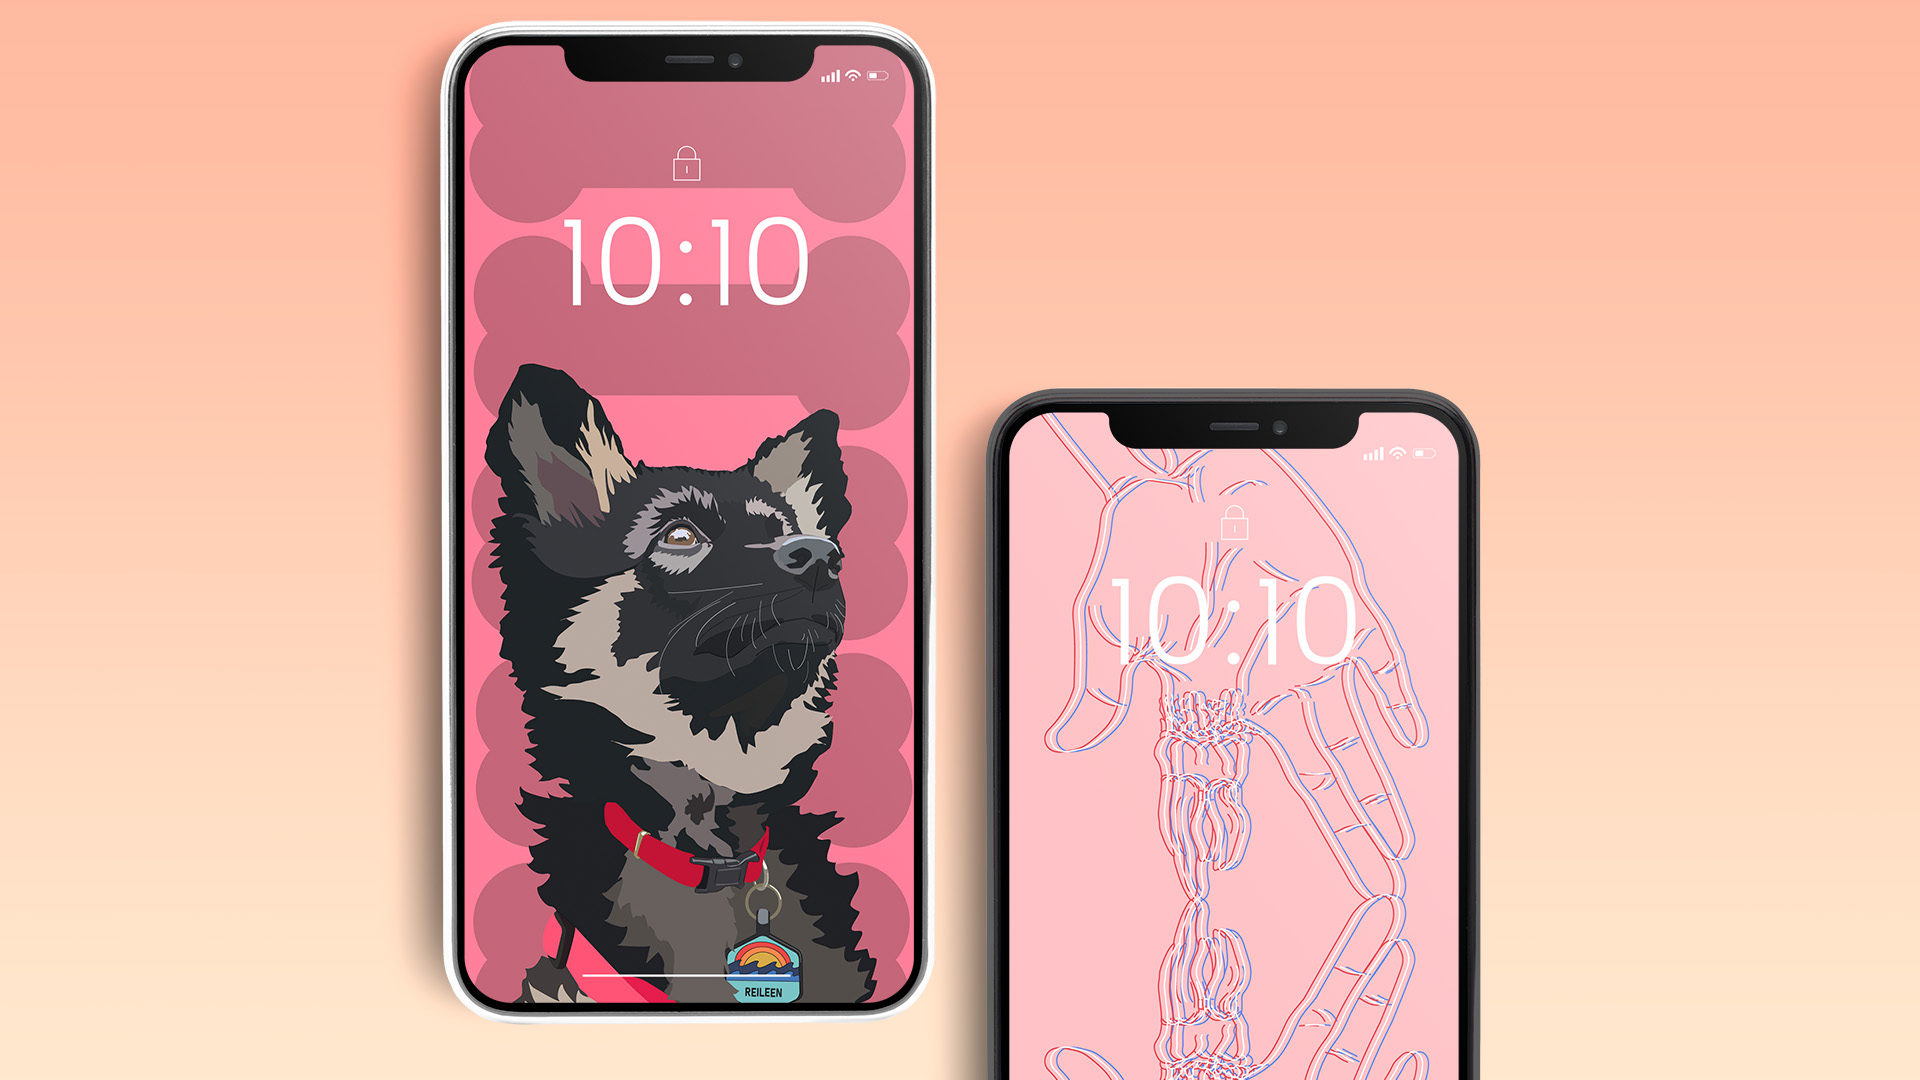 “Custom Wallpapers”  / “Custom Wallpapers,” Vector Illustration, 2020. Personalized mobile wallpapers.